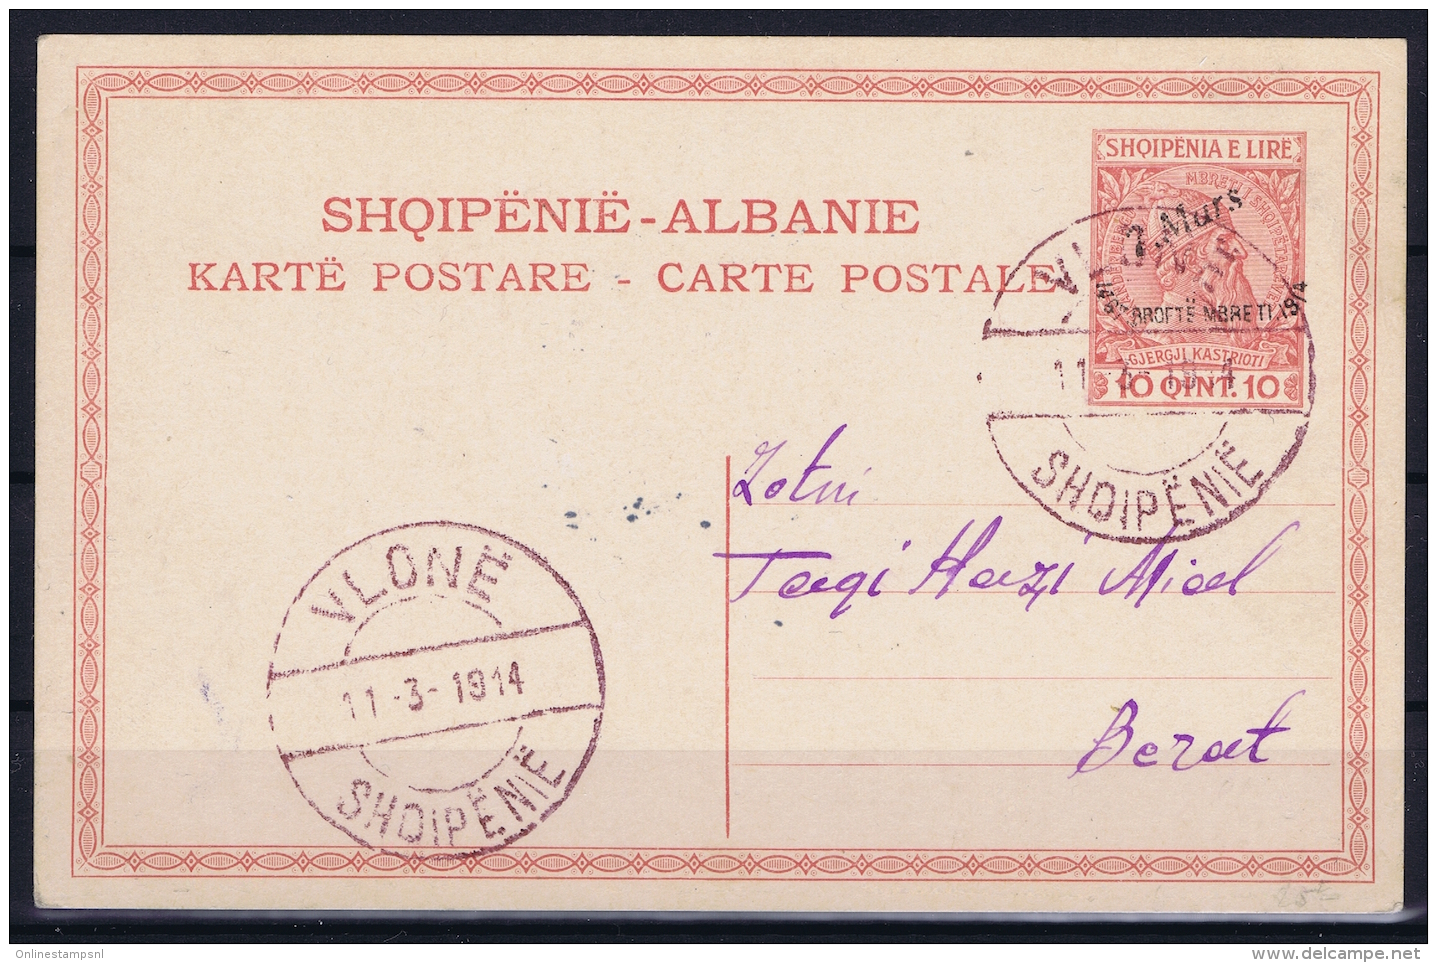 Albania: 1914 10 Q Red  Postcard Surcharge 7 Mars Legend Michel P8  CV € 1000  Signed DCR Numbered Used - Albanien